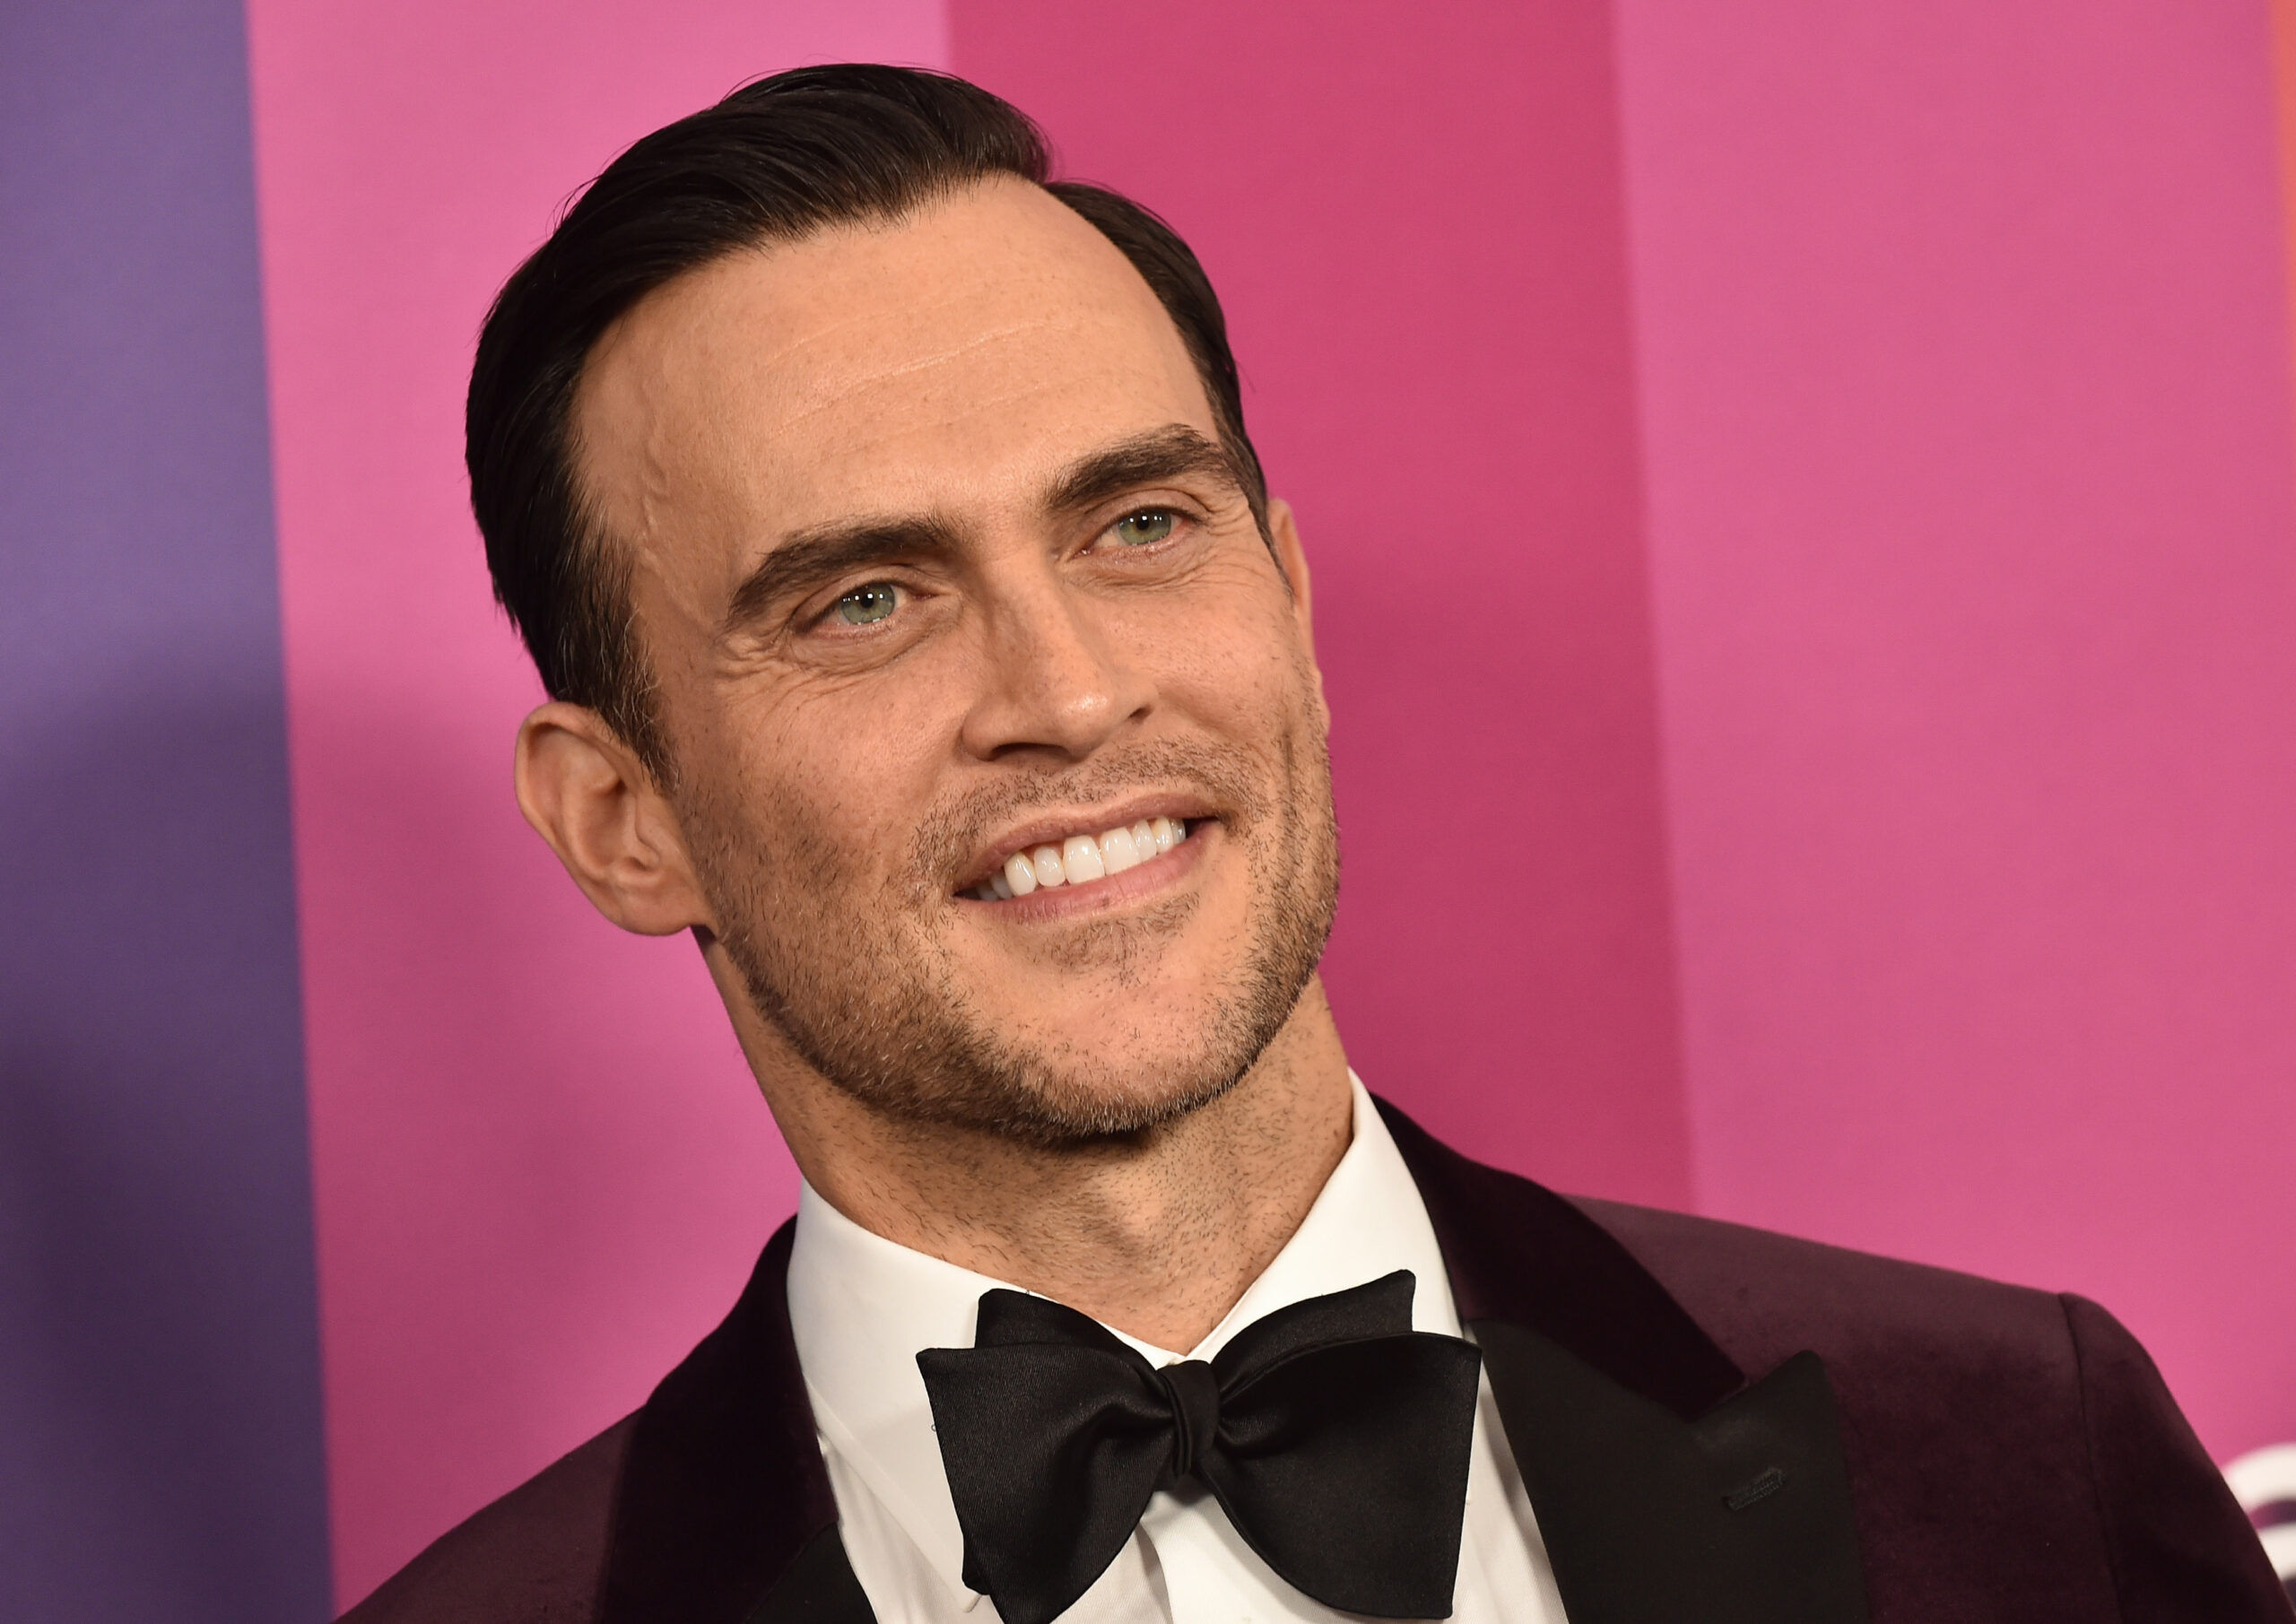 LOS ANGELES - OCT 10: Cheyenne Jackson arrives for the amFAR Gala Los Angeles 2019 on October 10, 2019 in Hollywood, CA